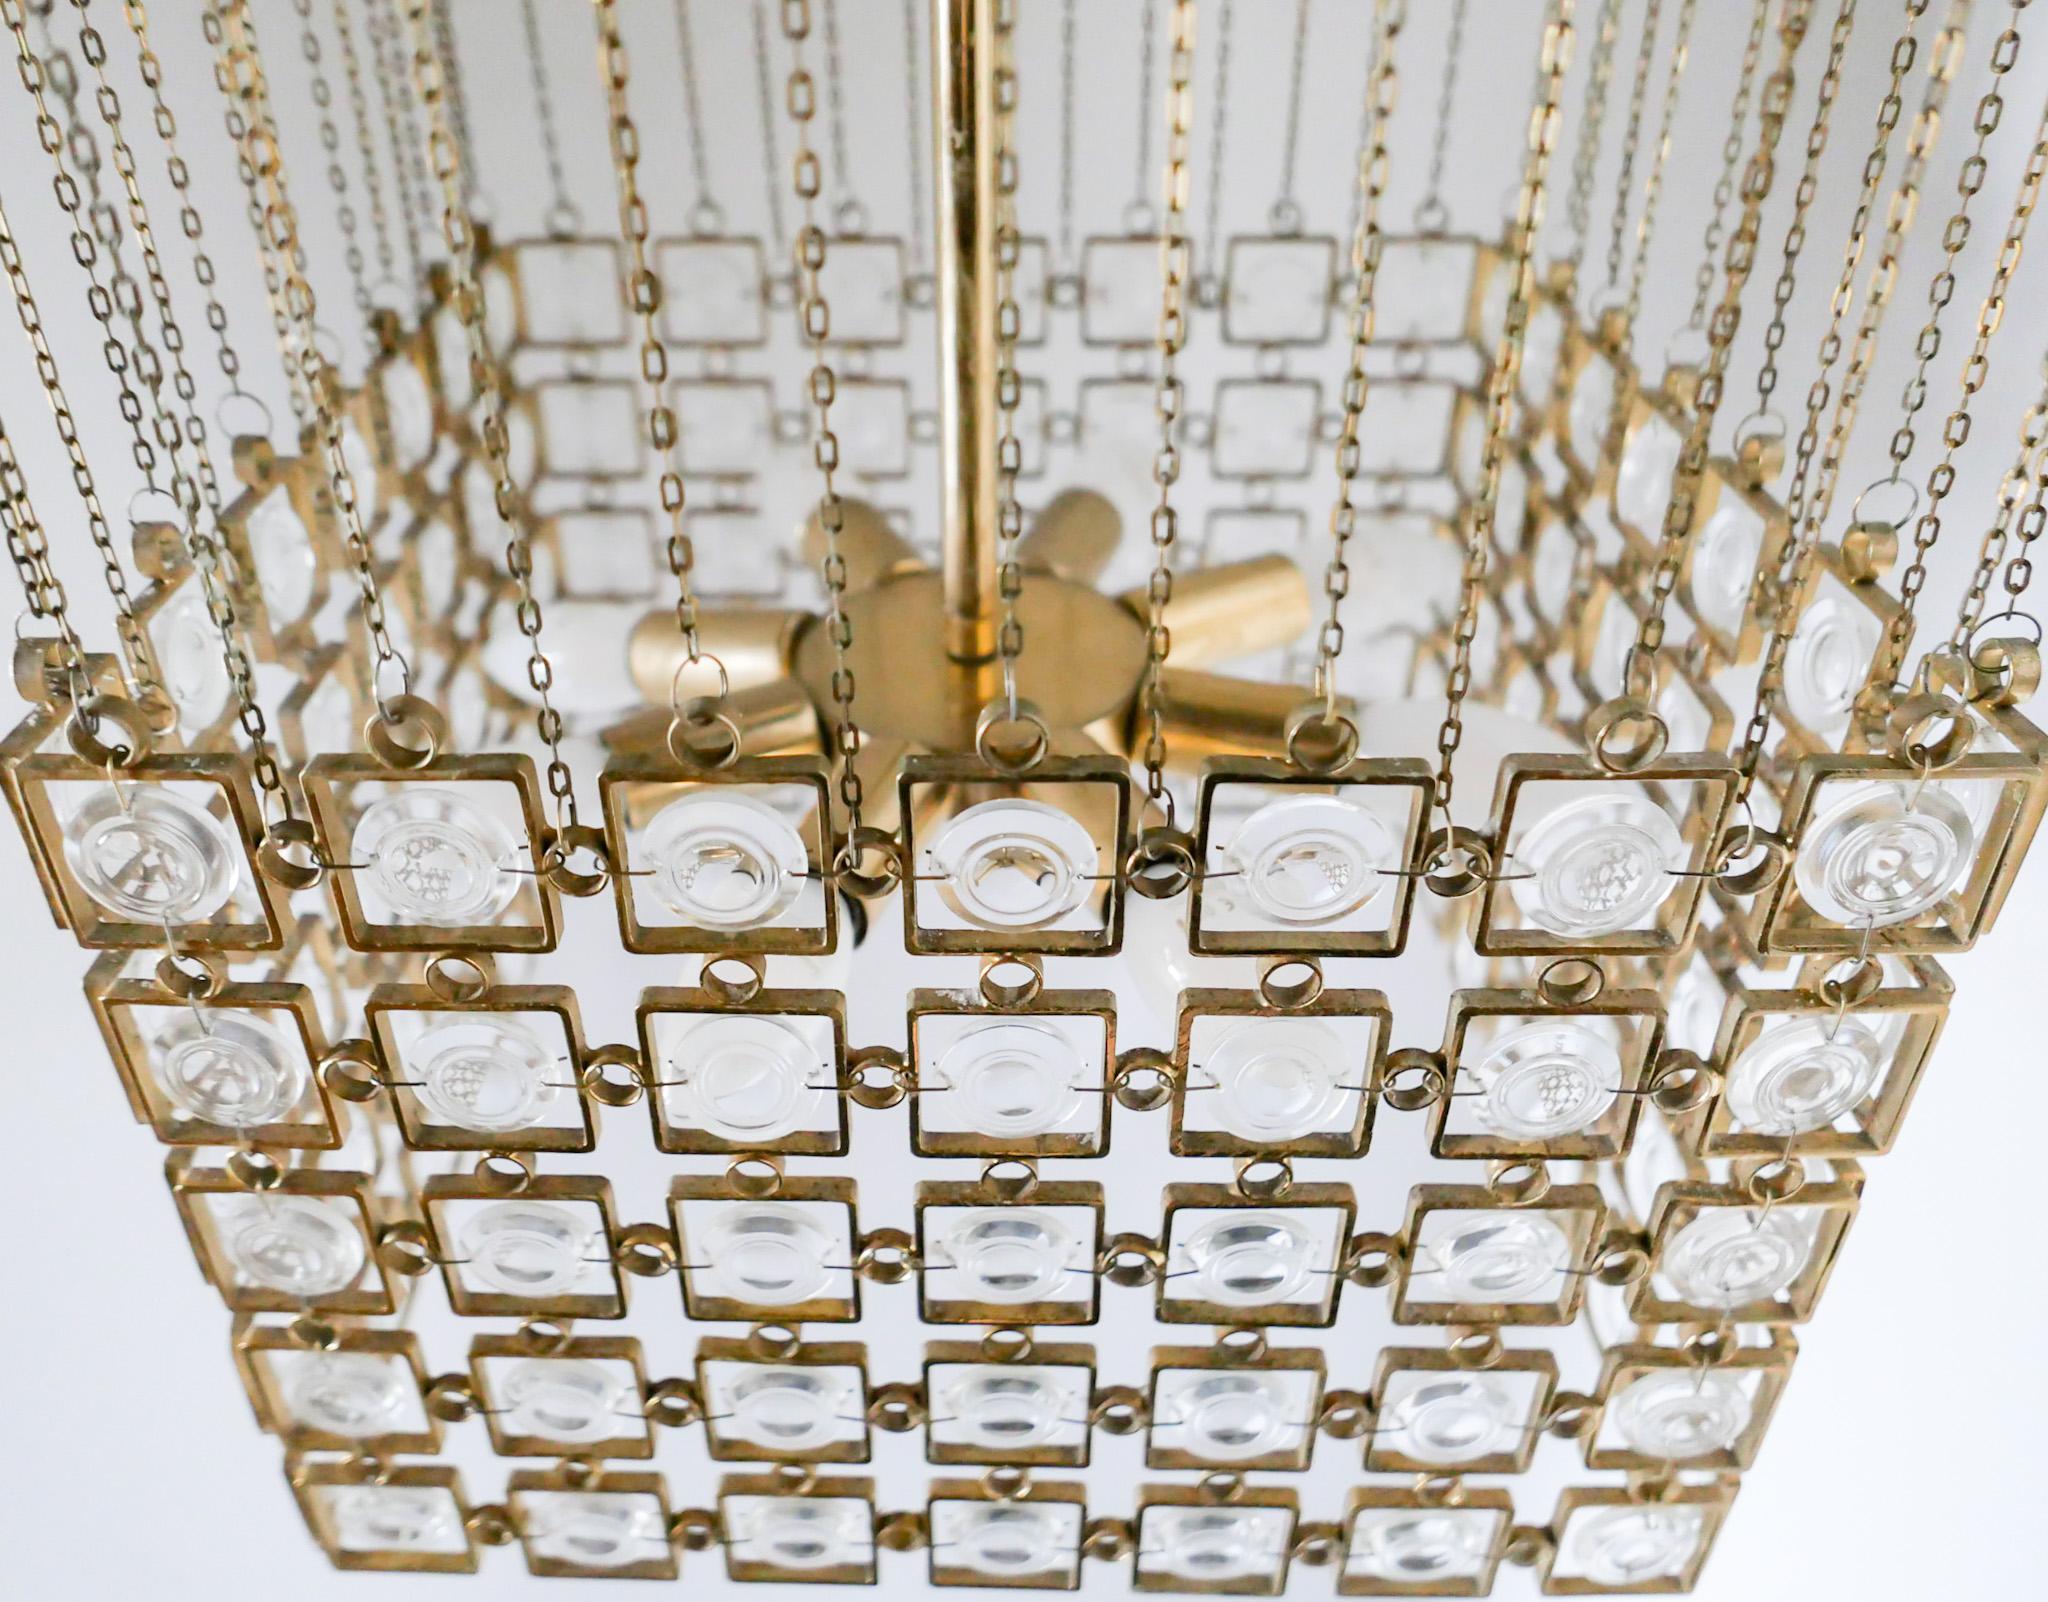 Mid-Century Modern Golden Pendant chandelier by Gaetano Sciolari, Italy 1970s.

This stunning pendant chandelier by the famous Italian Designer Gaetano Sciolari features ornamental details and a wonderful patina which add a truly glamorous touch